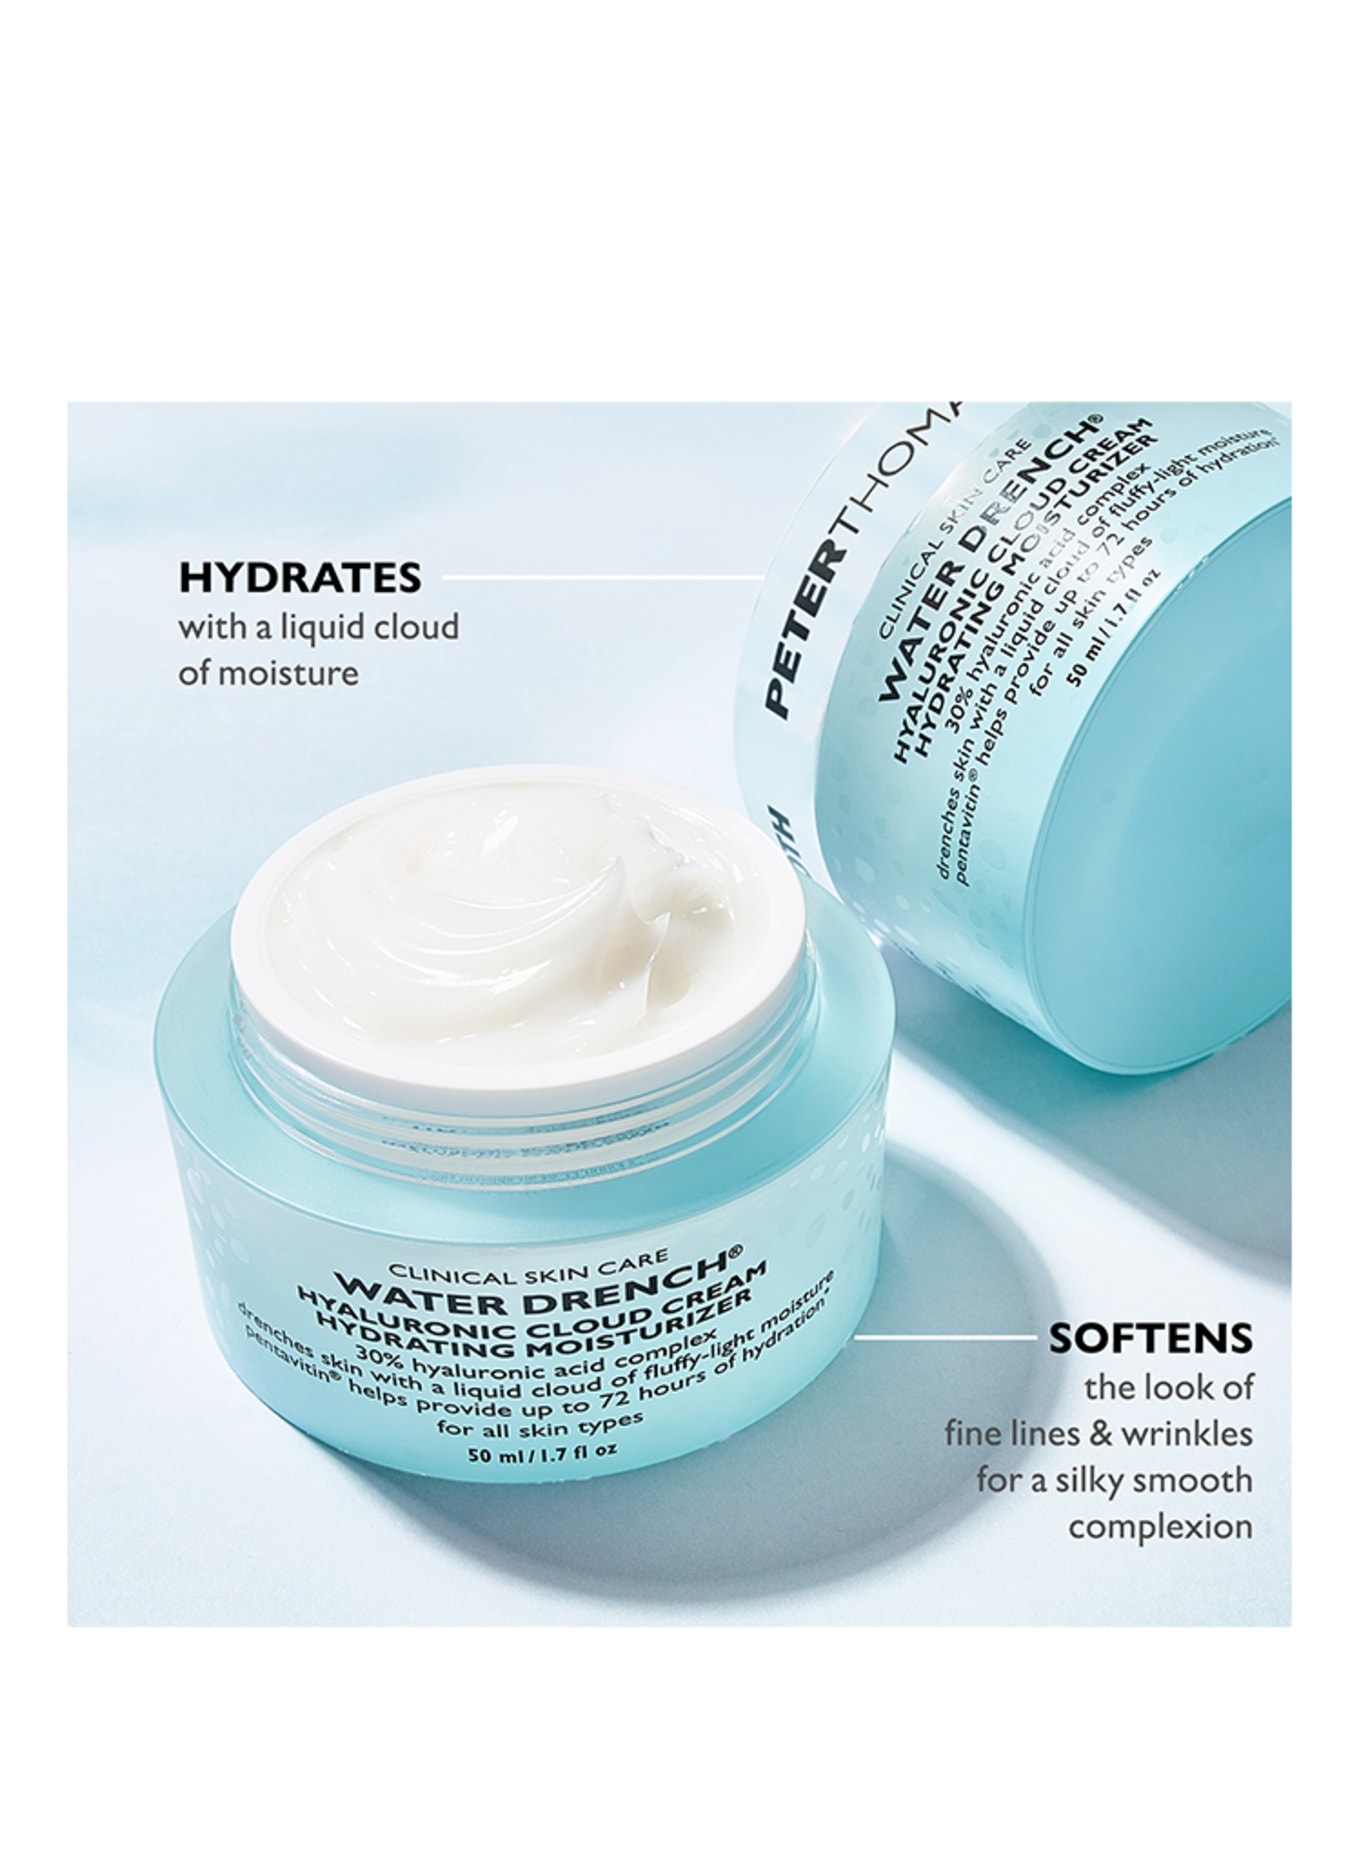 PETER THOMAS ROTH WATER DRENCH (Obrázek 3)